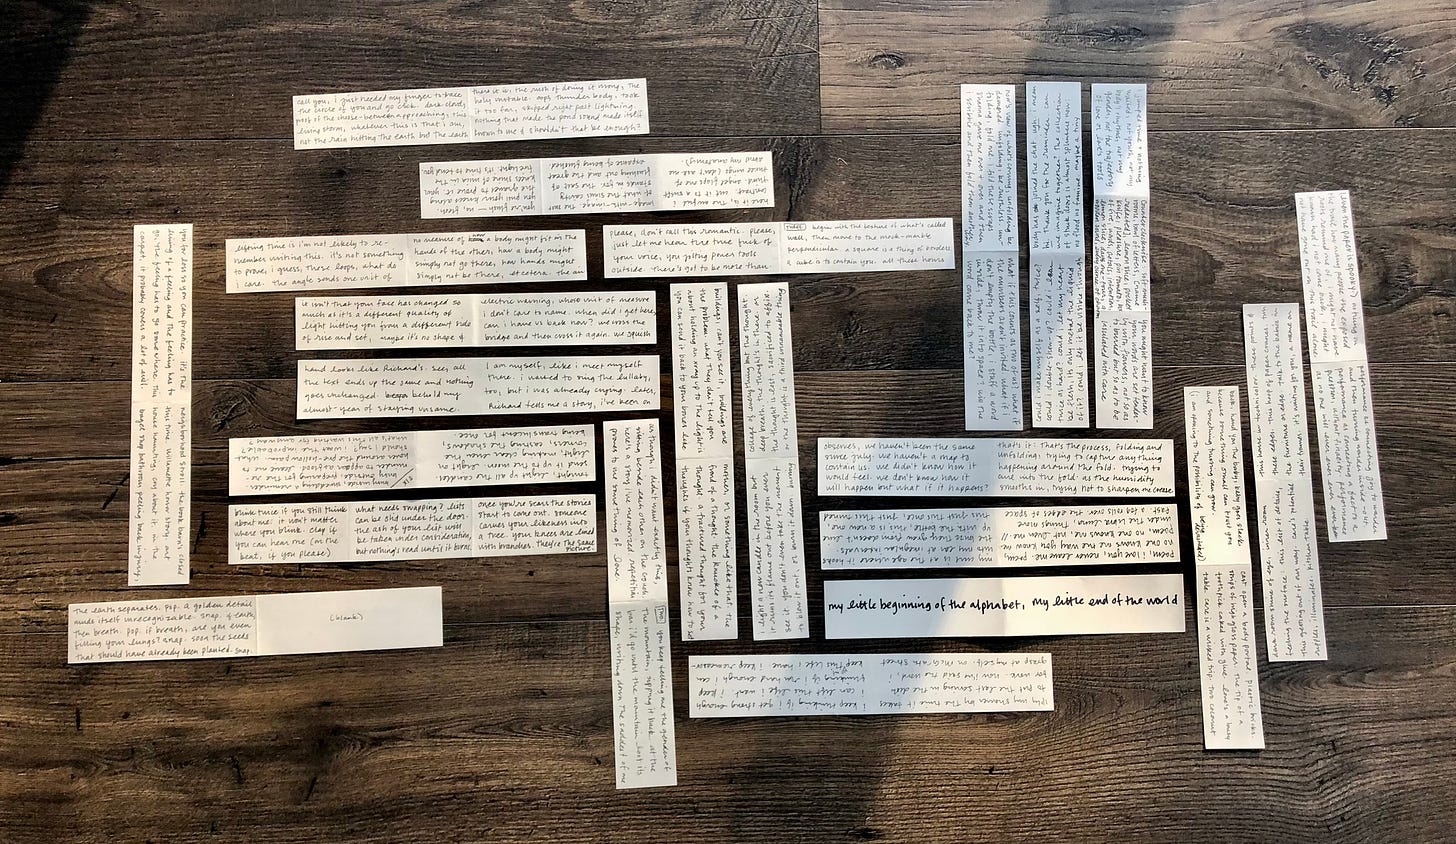 a collection of paper scraps, written on in black ink, laid out on a wooden floor, handwriting facing all directions, scraps making a lot of right angles.